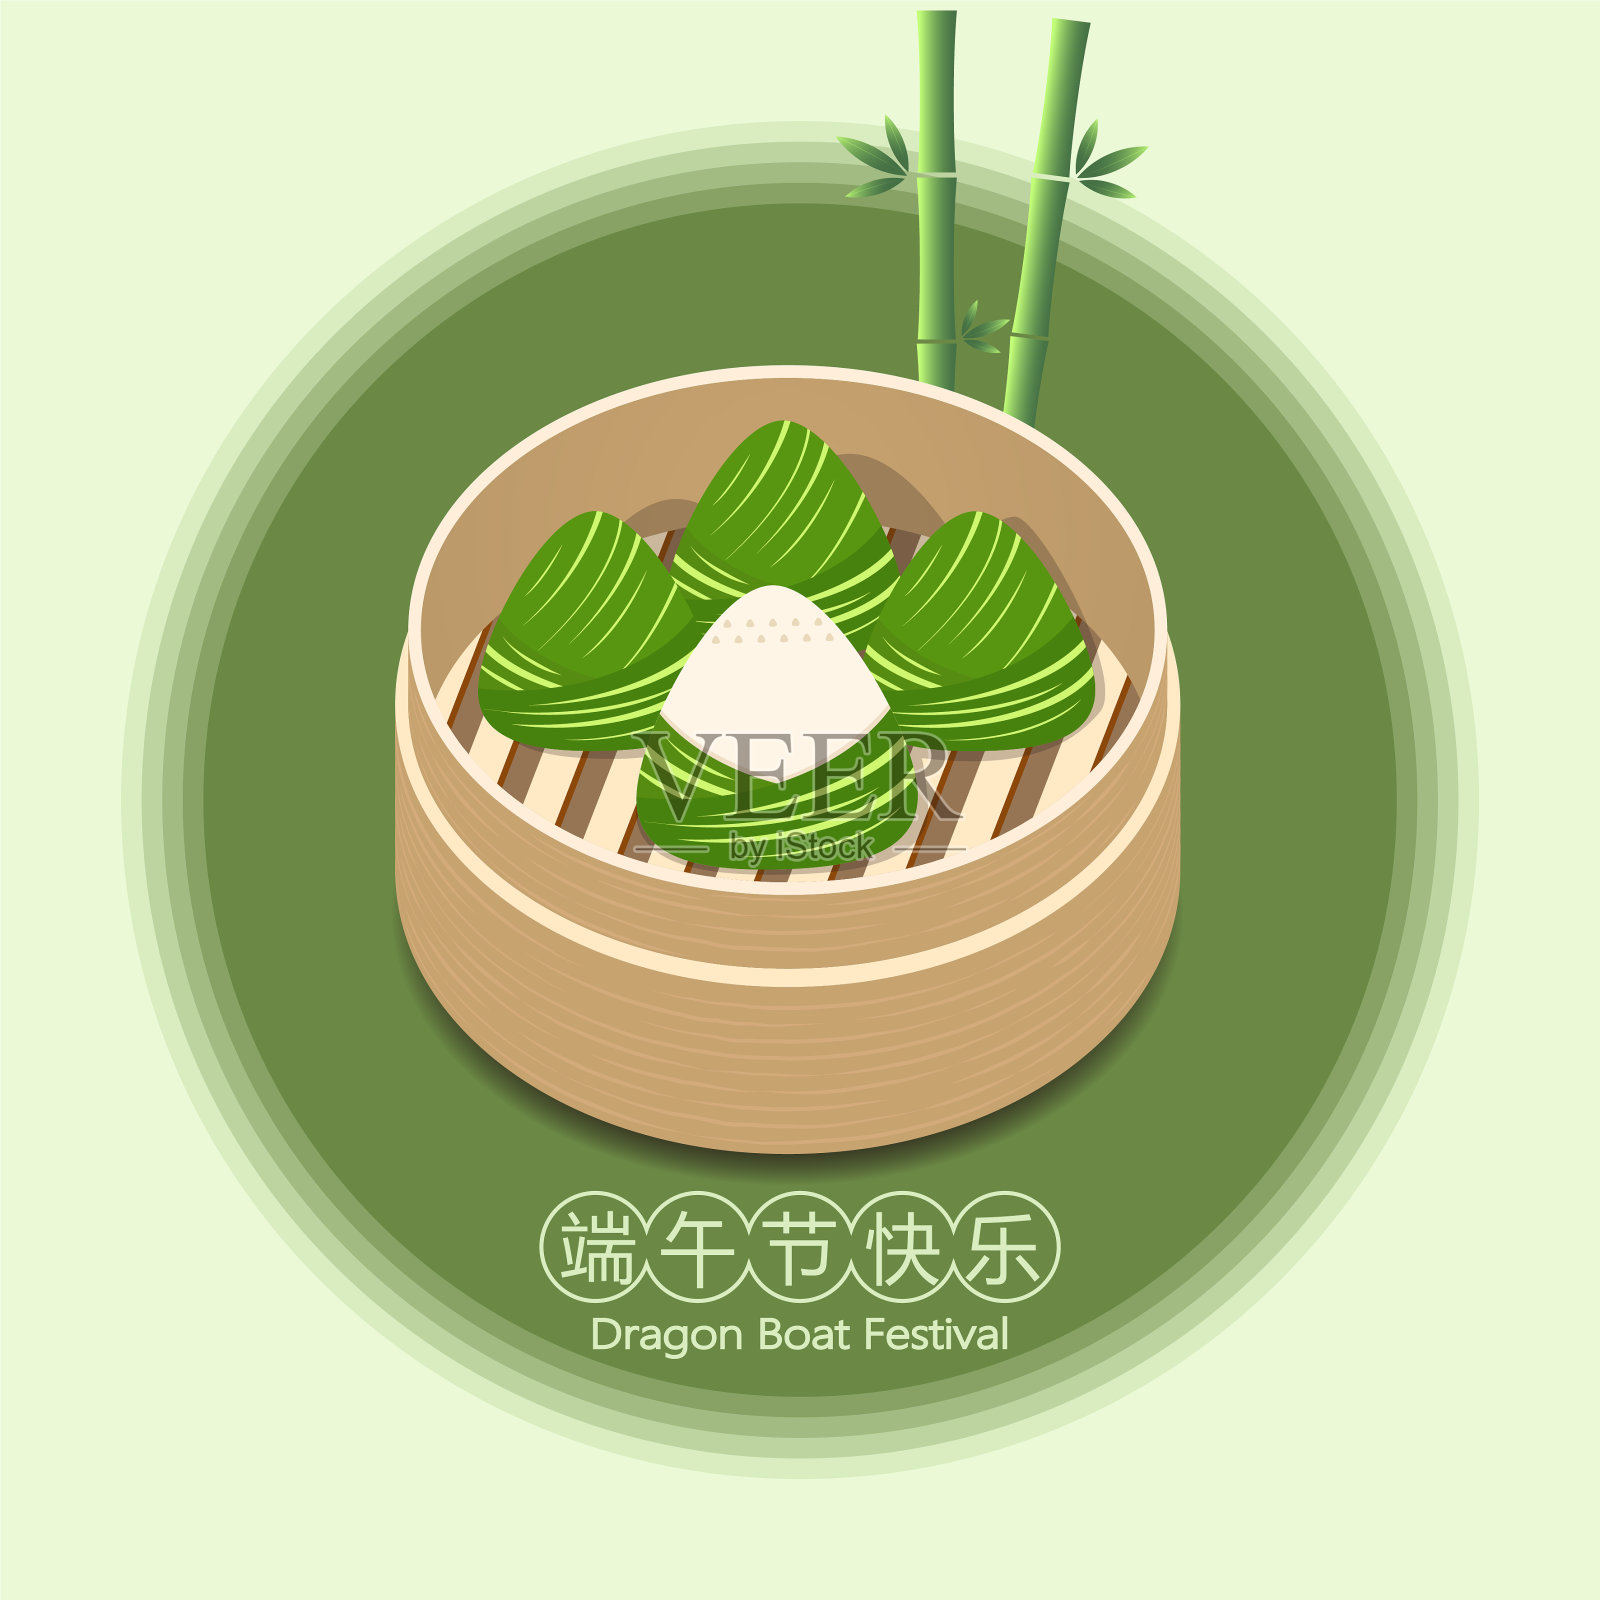 Dragon Boat Festival vector flat style illustration, Chinese traditional festival - Dragon Boat Festival插画图片素材